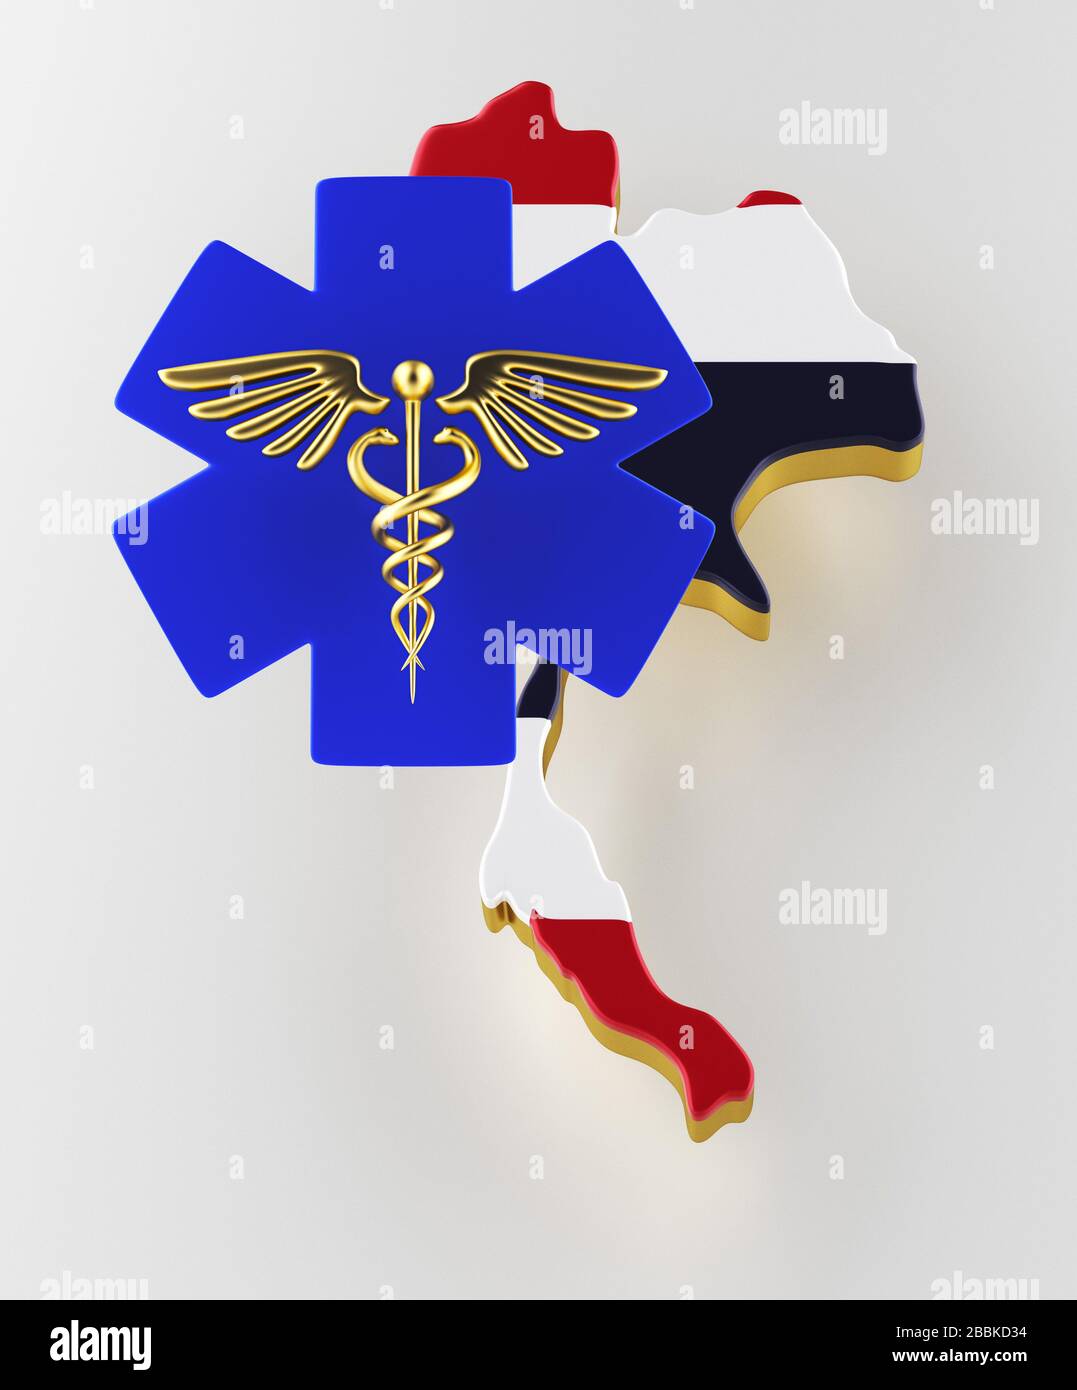 Caduceus sign with snakes on a medical star. Map of Thailand land border with flag. Thailand map on white background. 3d rendering Stock Photo